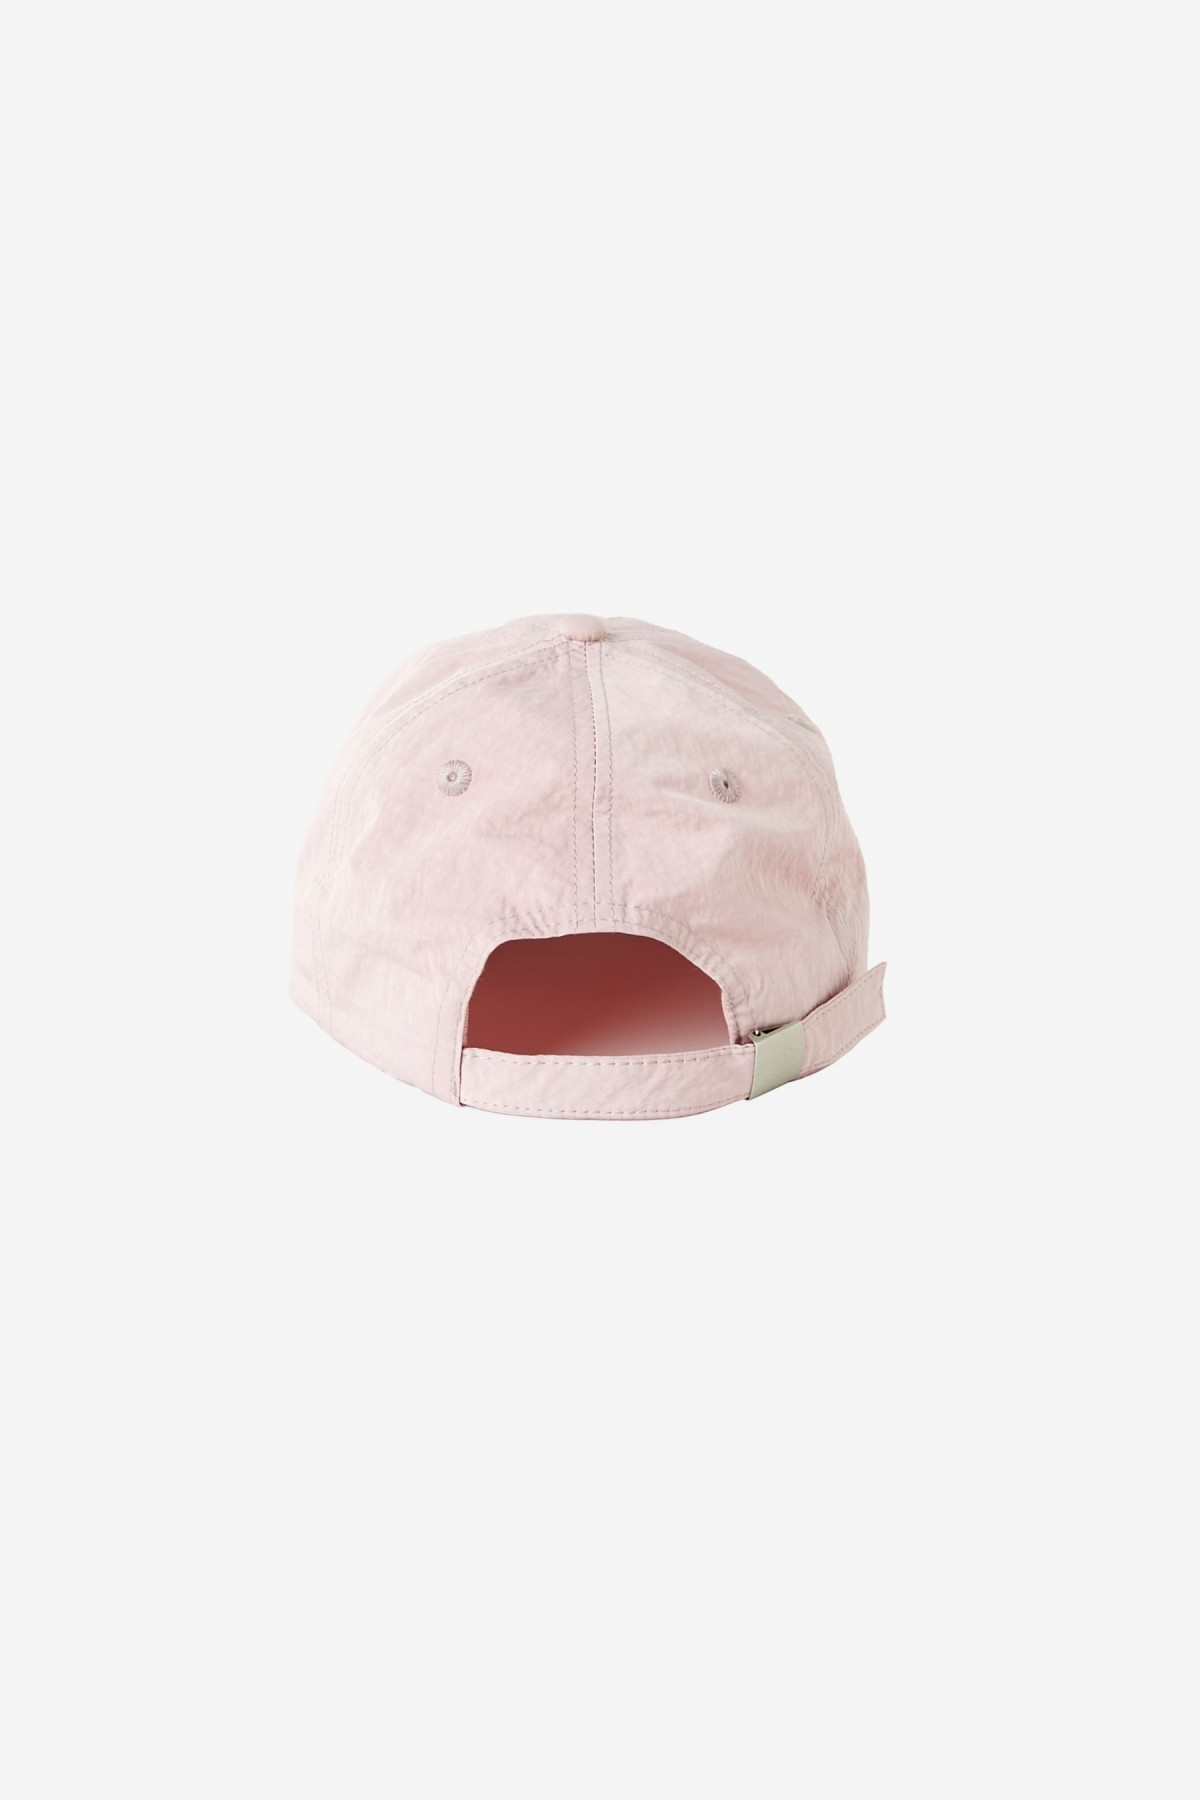 Heresy Blithe Cap in Pink